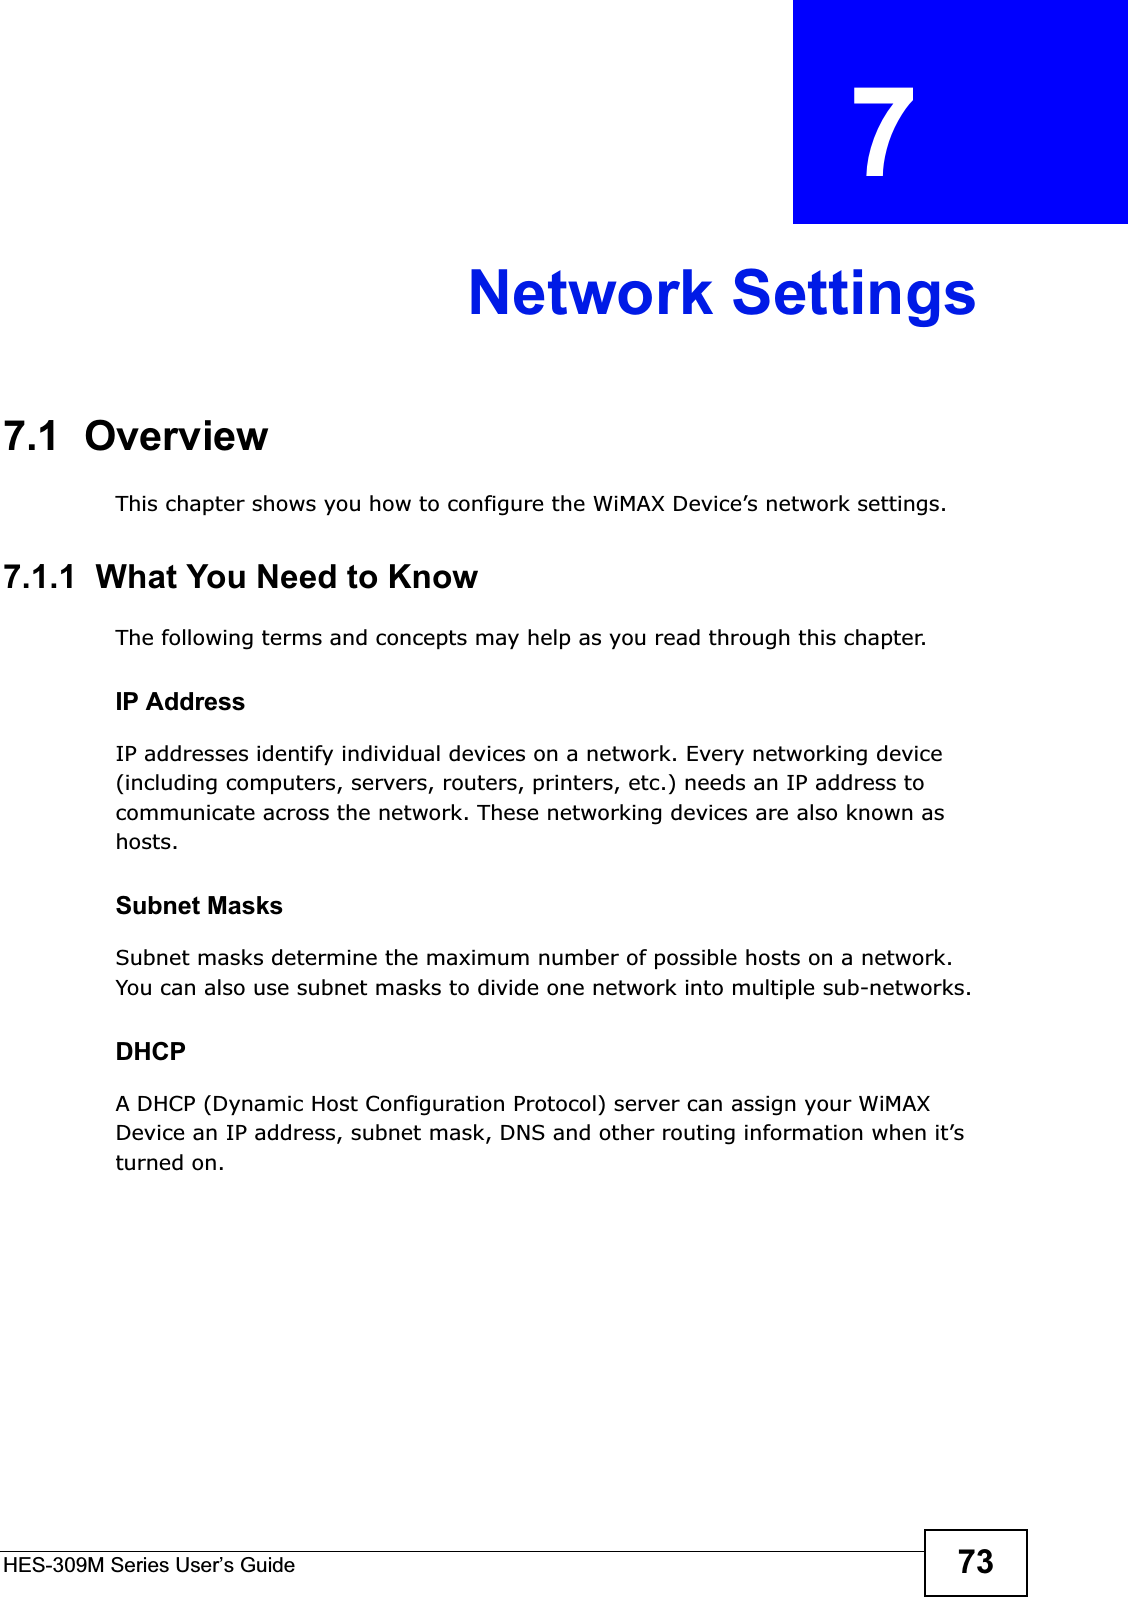 HES-309M Series User’s Guide 73CHAPTER  7 Network Settings7.1  OverviewThis chapter shows you how to configure the WiMAX Device’s network settings.7.1.1  What You Need to KnowThe following terms and concepts may help as you read through this chapter.IP AddressIP addresses identify individual devices on a network. Every networking device (including computers, servers, routers, printers, etc.) needs an IP address to communicate across the network. These networking devices are also known as hosts.Subnet MasksSubnet masks determine the maximum number of possible hosts on a network. You can also use subnet masks to divide one network into multiple sub-networks.DHCPA DHCP (Dynamic Host Configuration Protocol) server can assign your WiMAX Device an IP address, subnet mask, DNS and other routing information when it’s turned on.